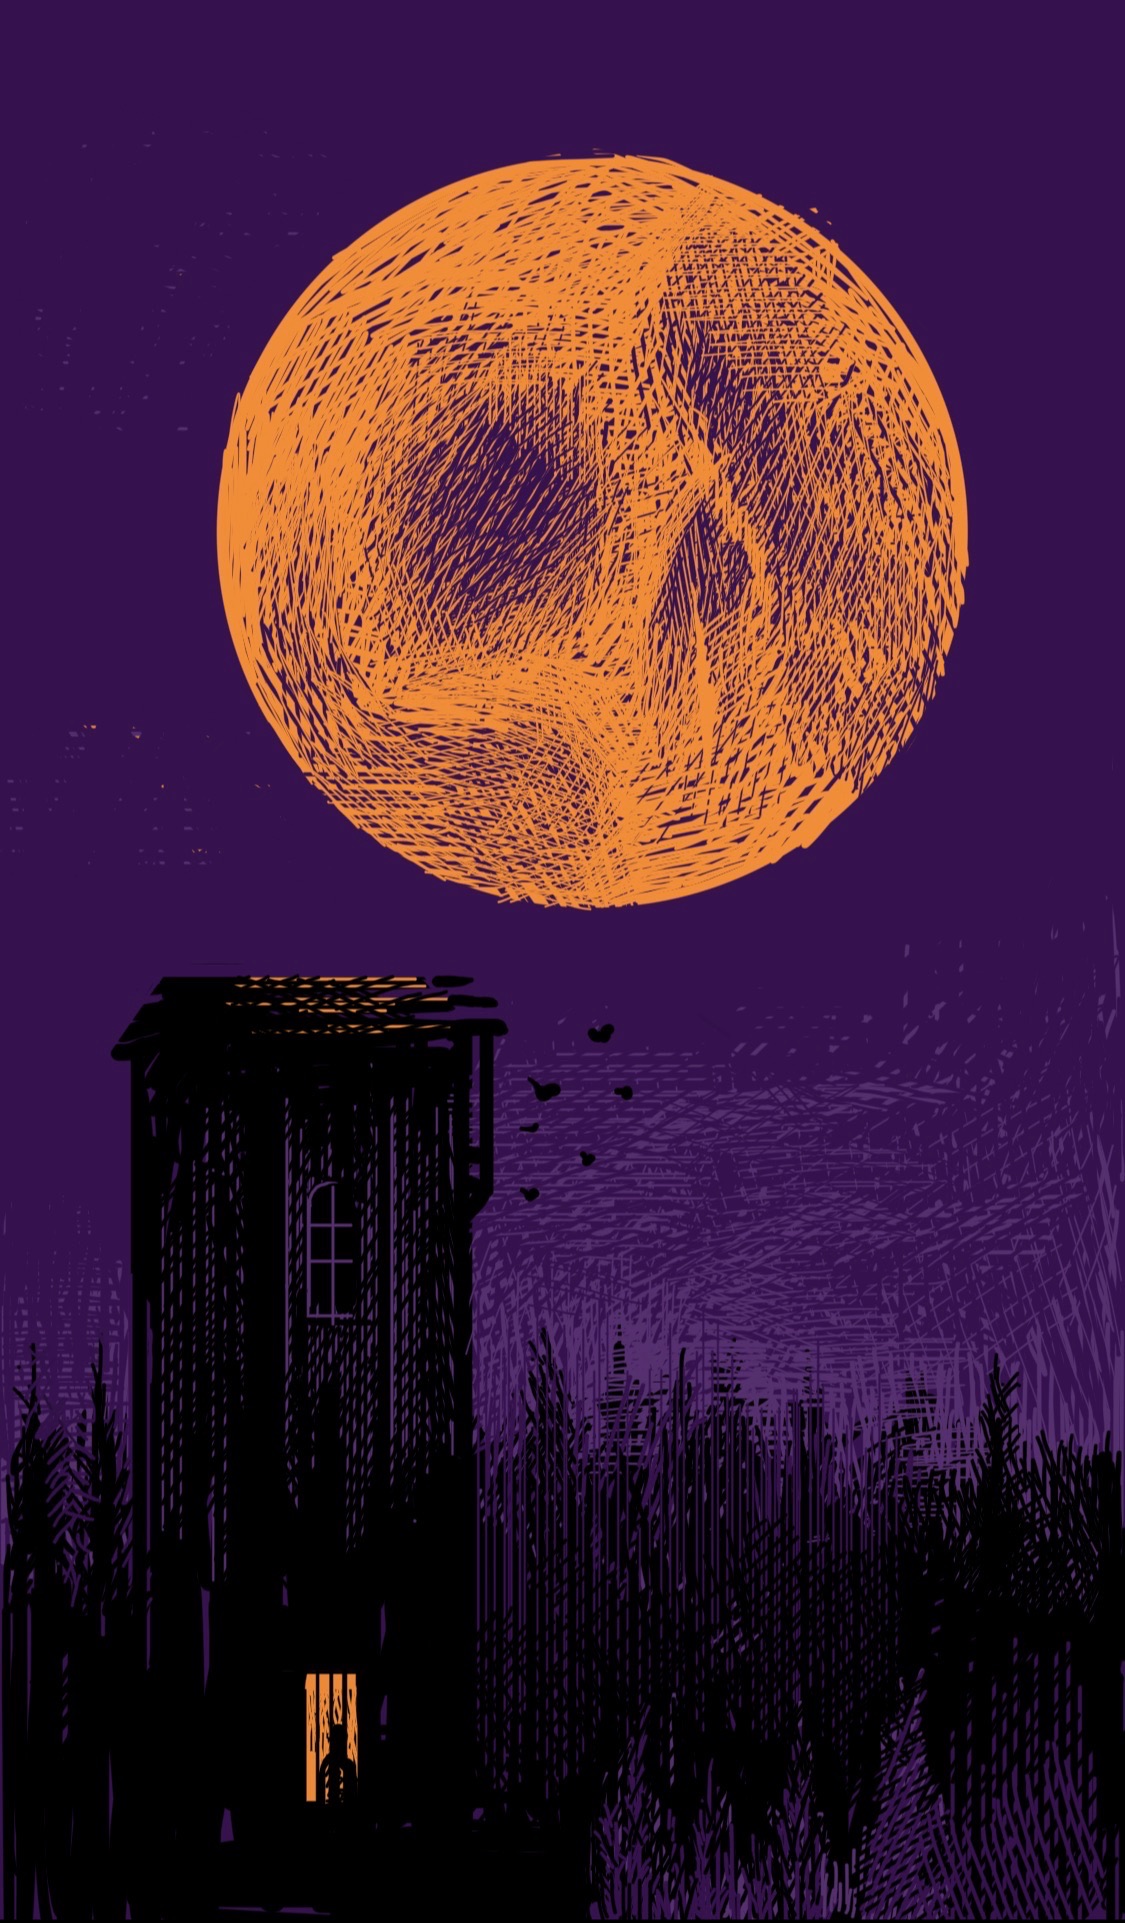 A creepy tower in the middle of the woods, illuminated by a giant orange moon with a skull face inside it, because it's Halloween and I go all-out for these sorts of things